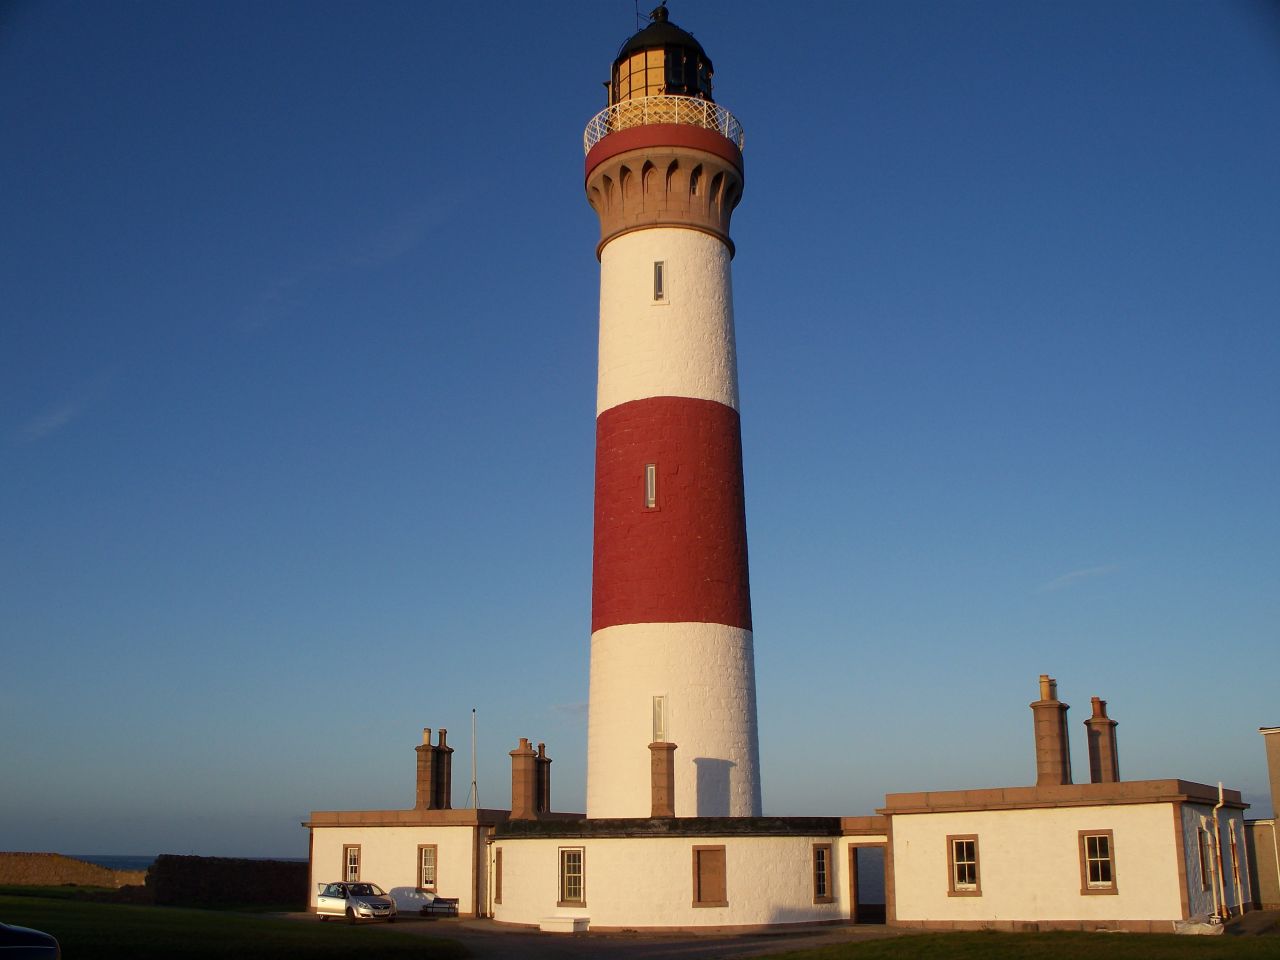 Visitors can sleep in the Buchan Ness Lighthouse, which has two rooms. <a href="http://ireport.cnn.com/docs/DOC-1156918">David Gibbs</a> photographed it in Boddam, Scotland, in 2009. 